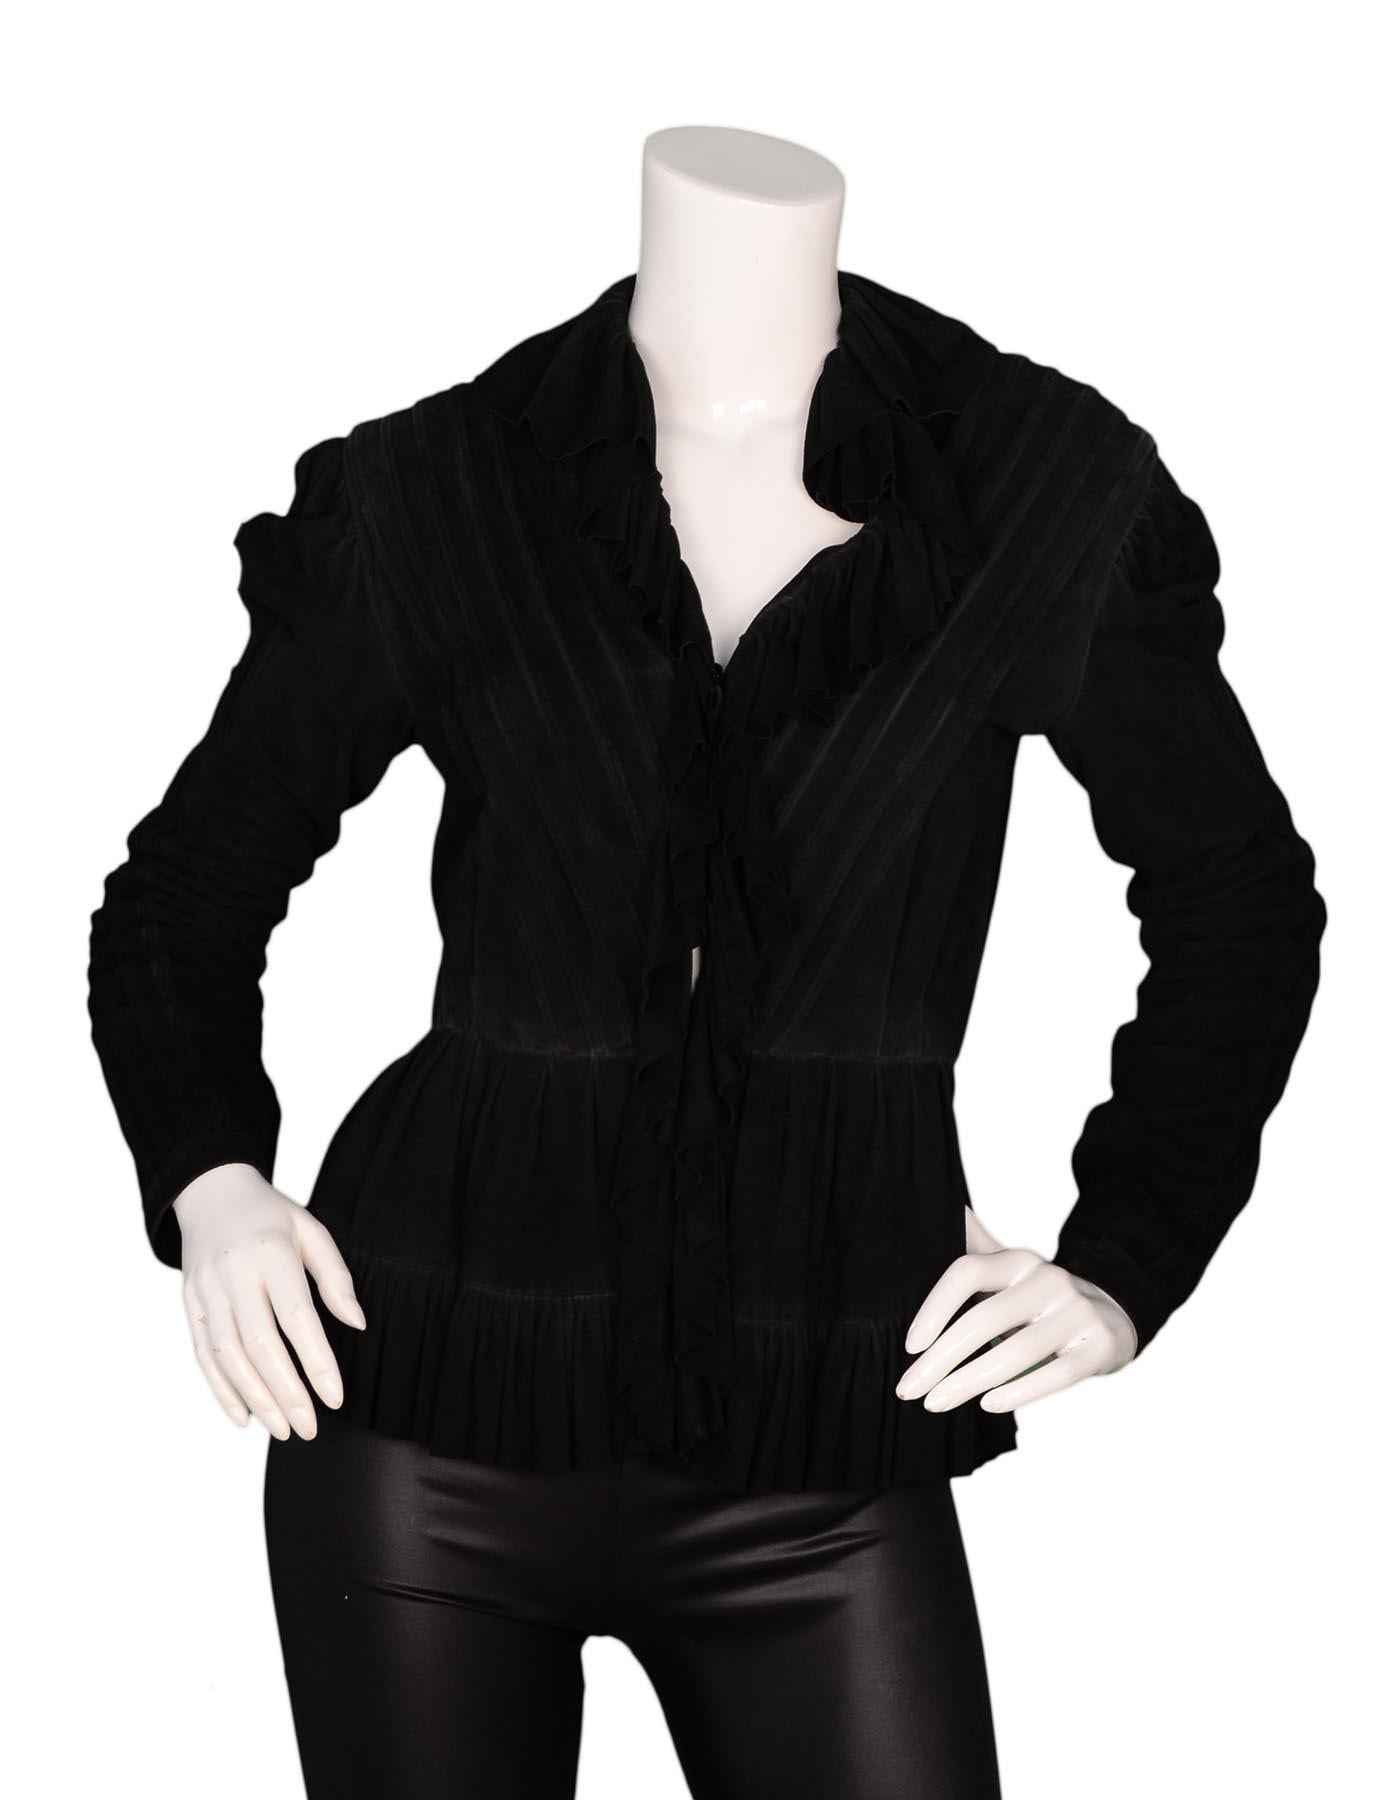 Ralph Lauren Black Suede Ruffle Jacket Sz 4

Made In: USA
Color: Black
Materials: 100% deerskin
Opening/Closure: Buttons at front
Overall Condition: Very good pre-owned condition with excpetion of some fading at seams

Measurements: 
Shoulder To